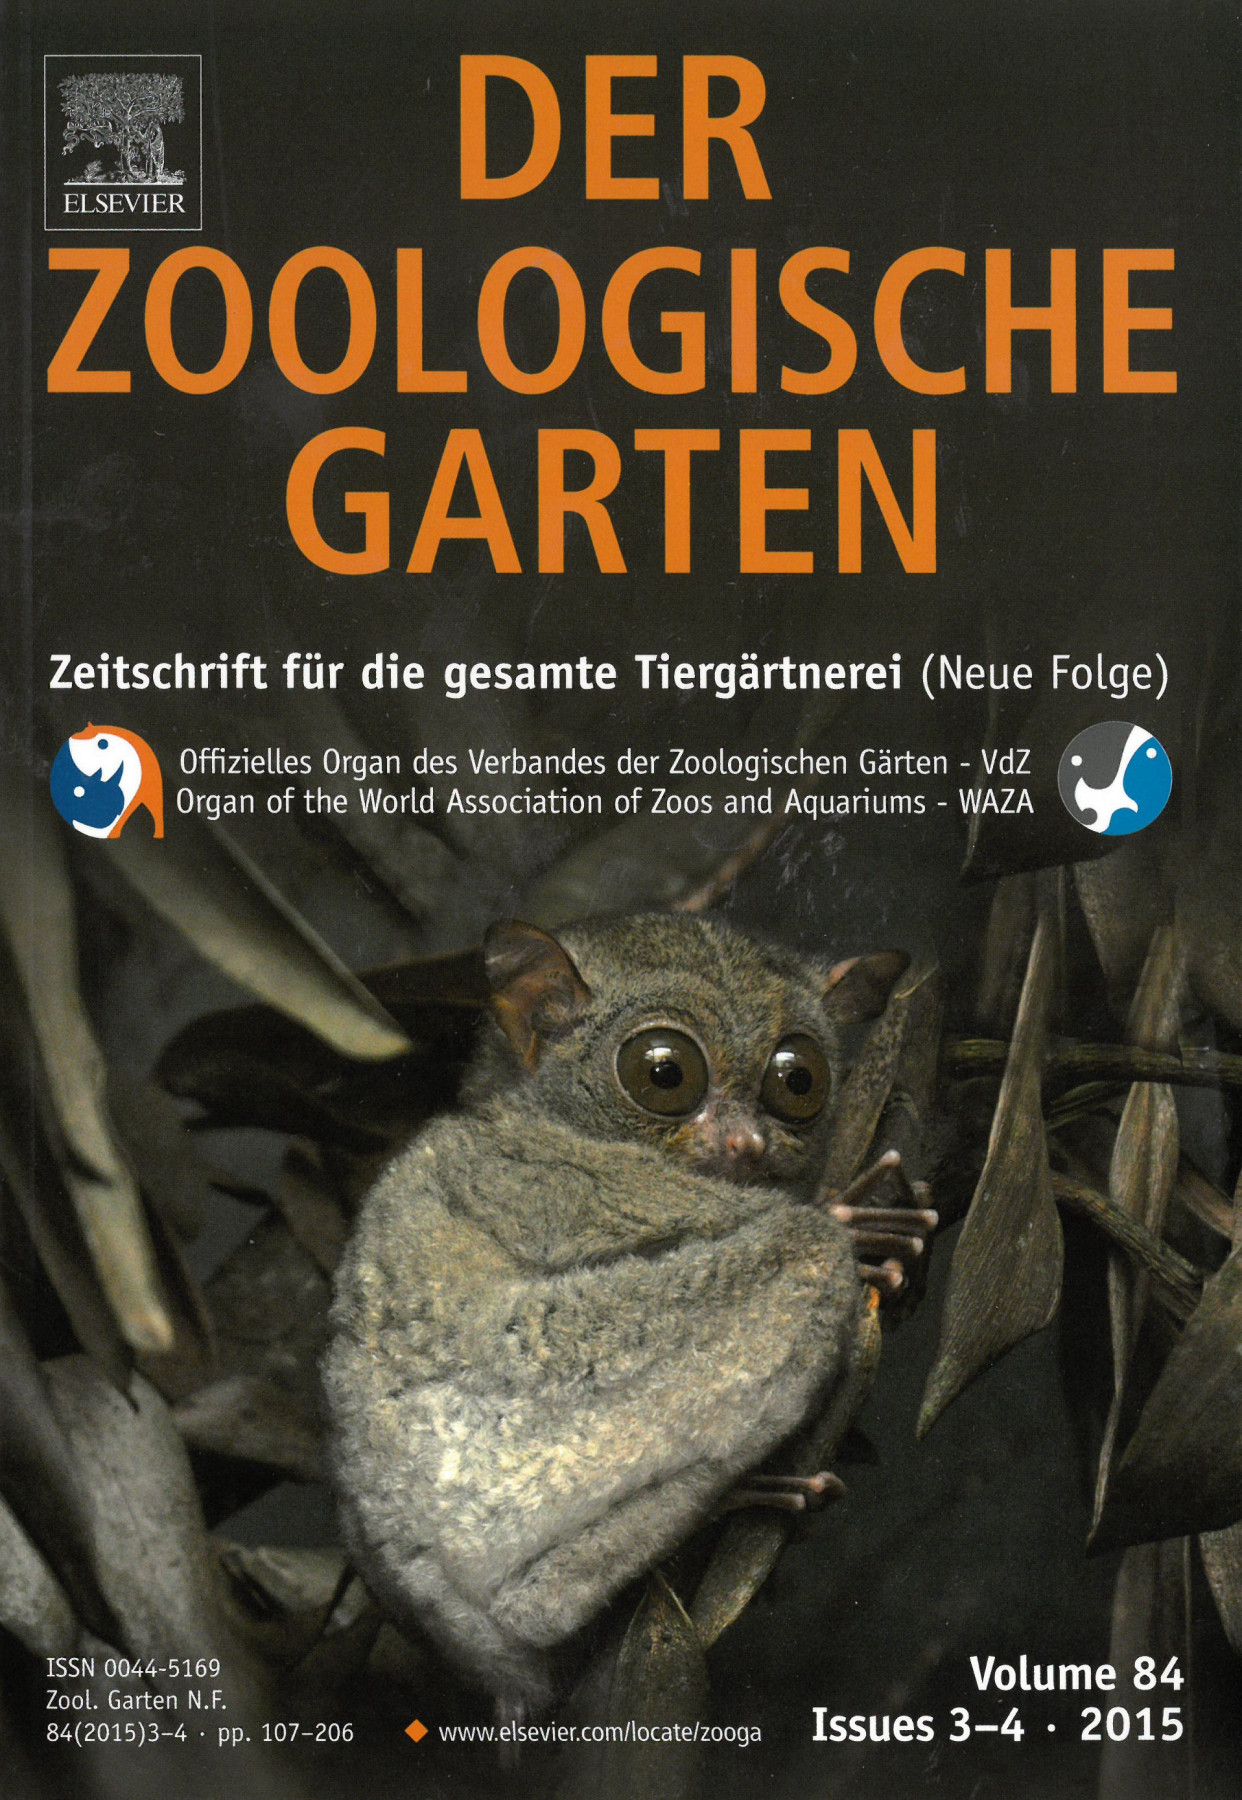 Cover page of Der Zoologische Garten with photograph of a possum